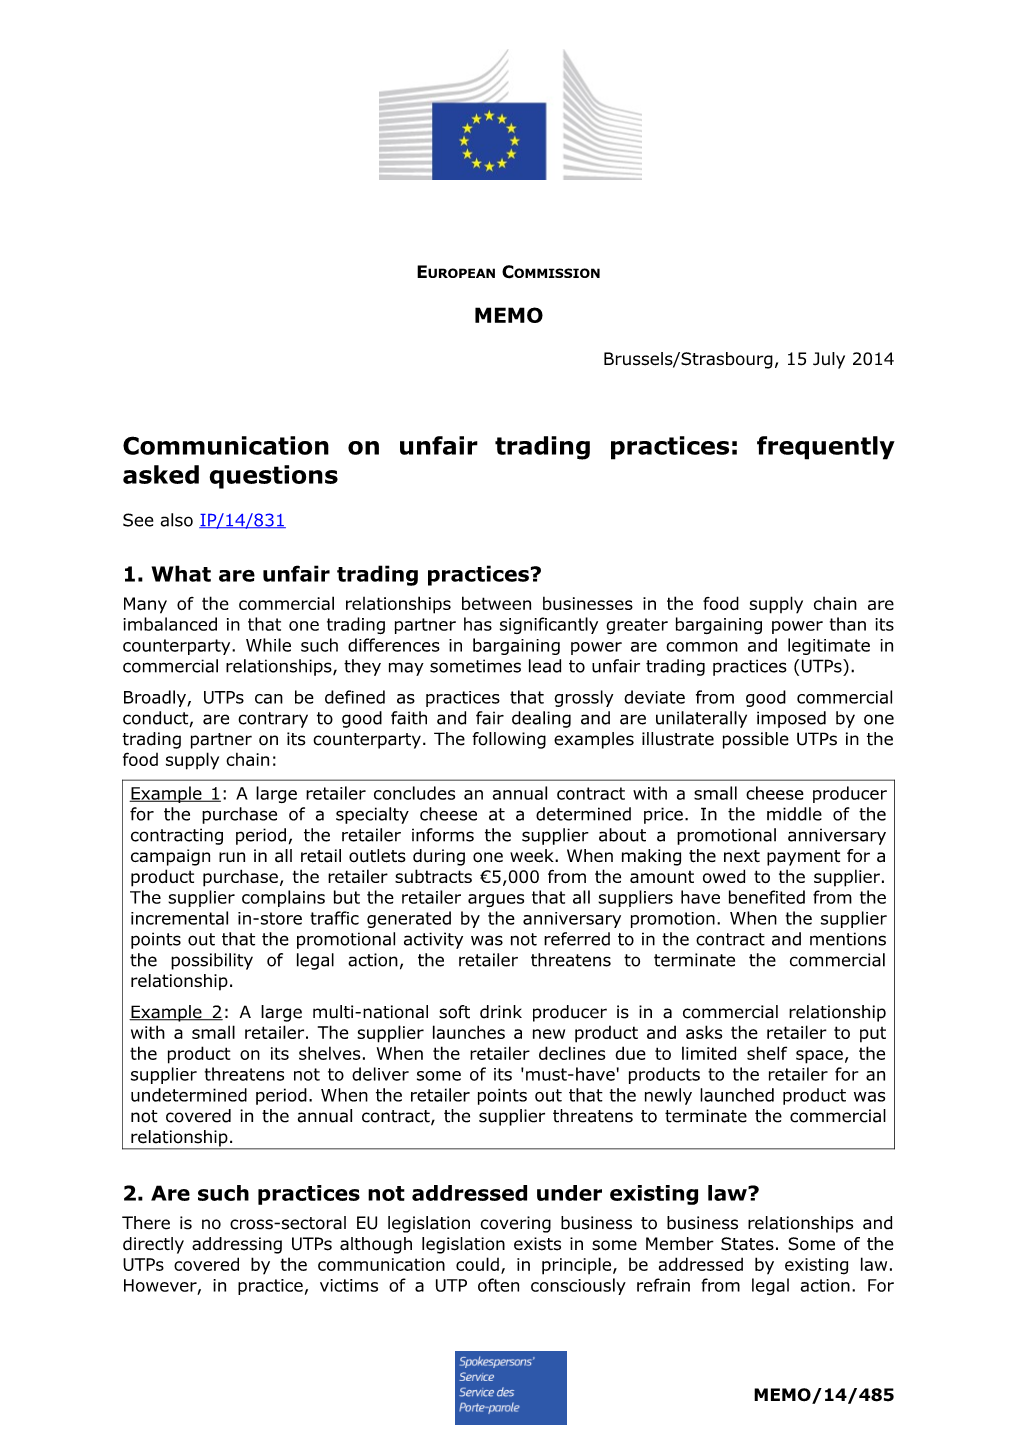 Communication on Unfair Trading Practices: Frequently Asked Questions